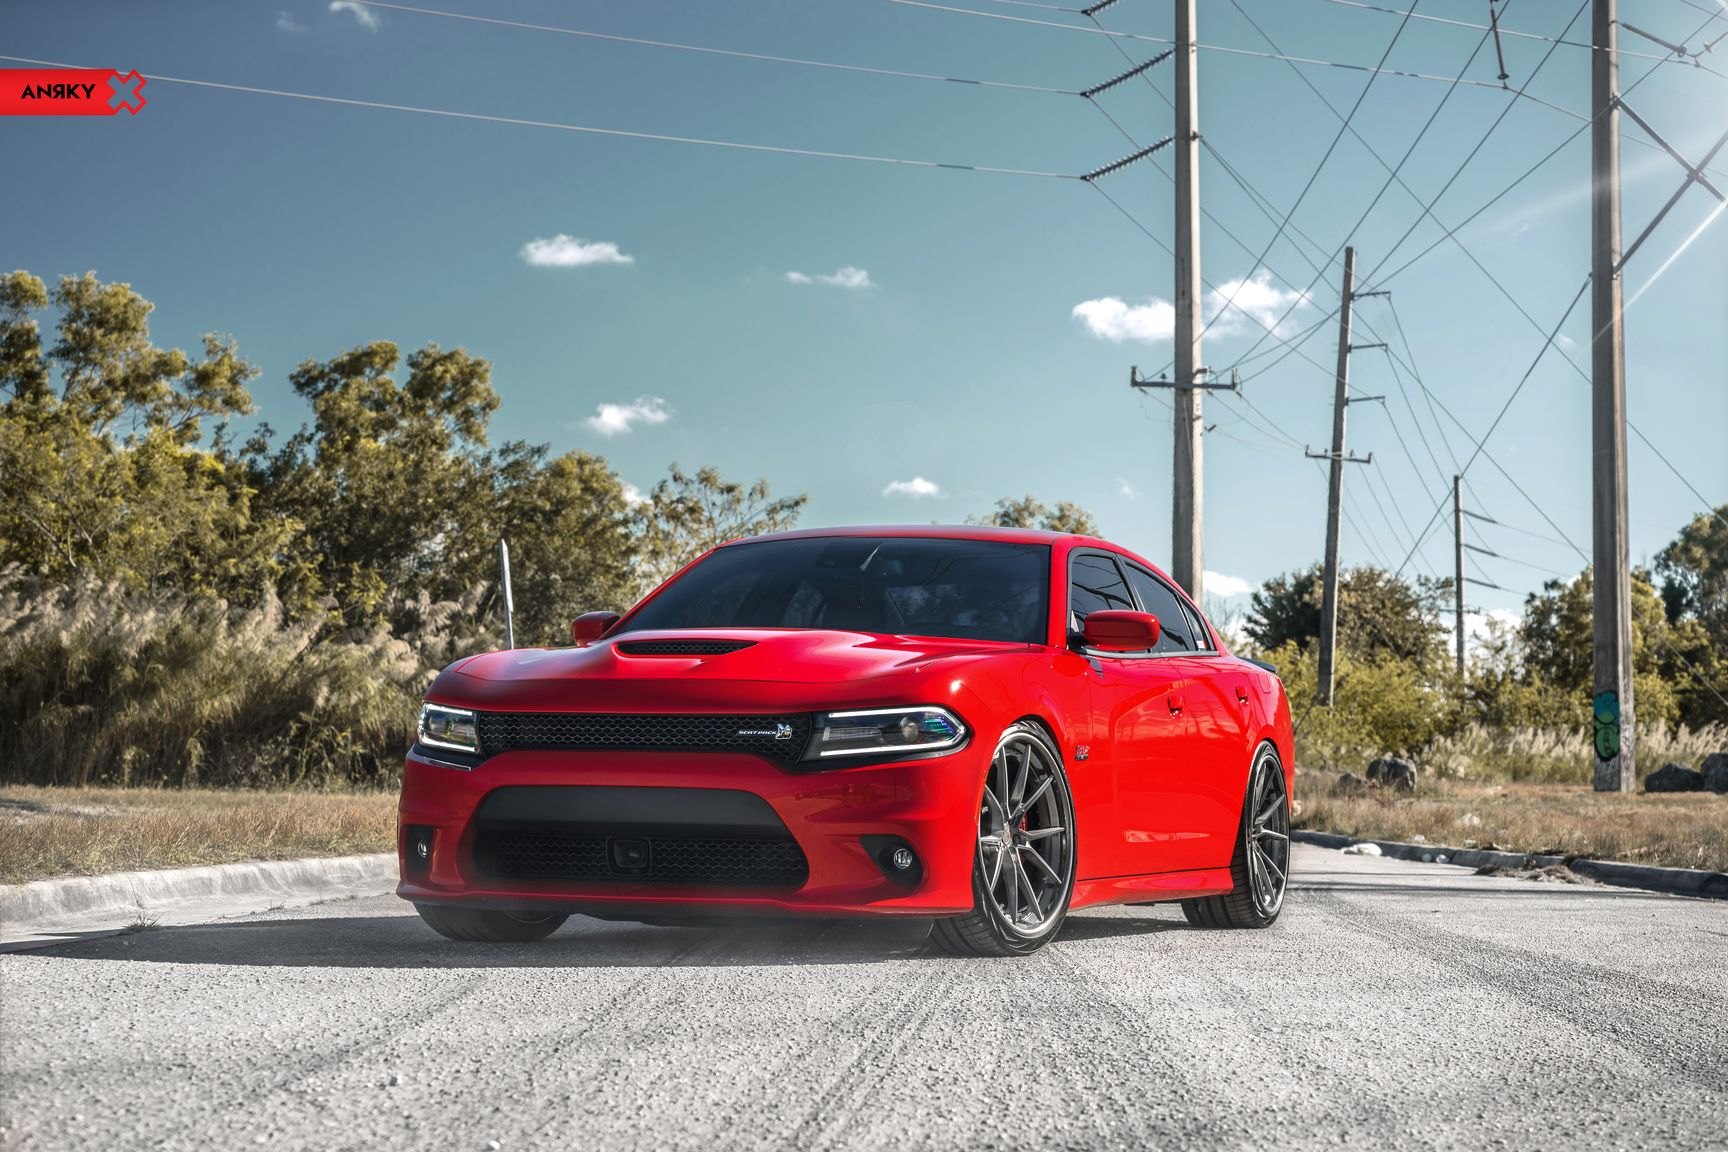 Custom Vented Hood on Red Dodge Charger SRT - Photo by Anrky Wheels